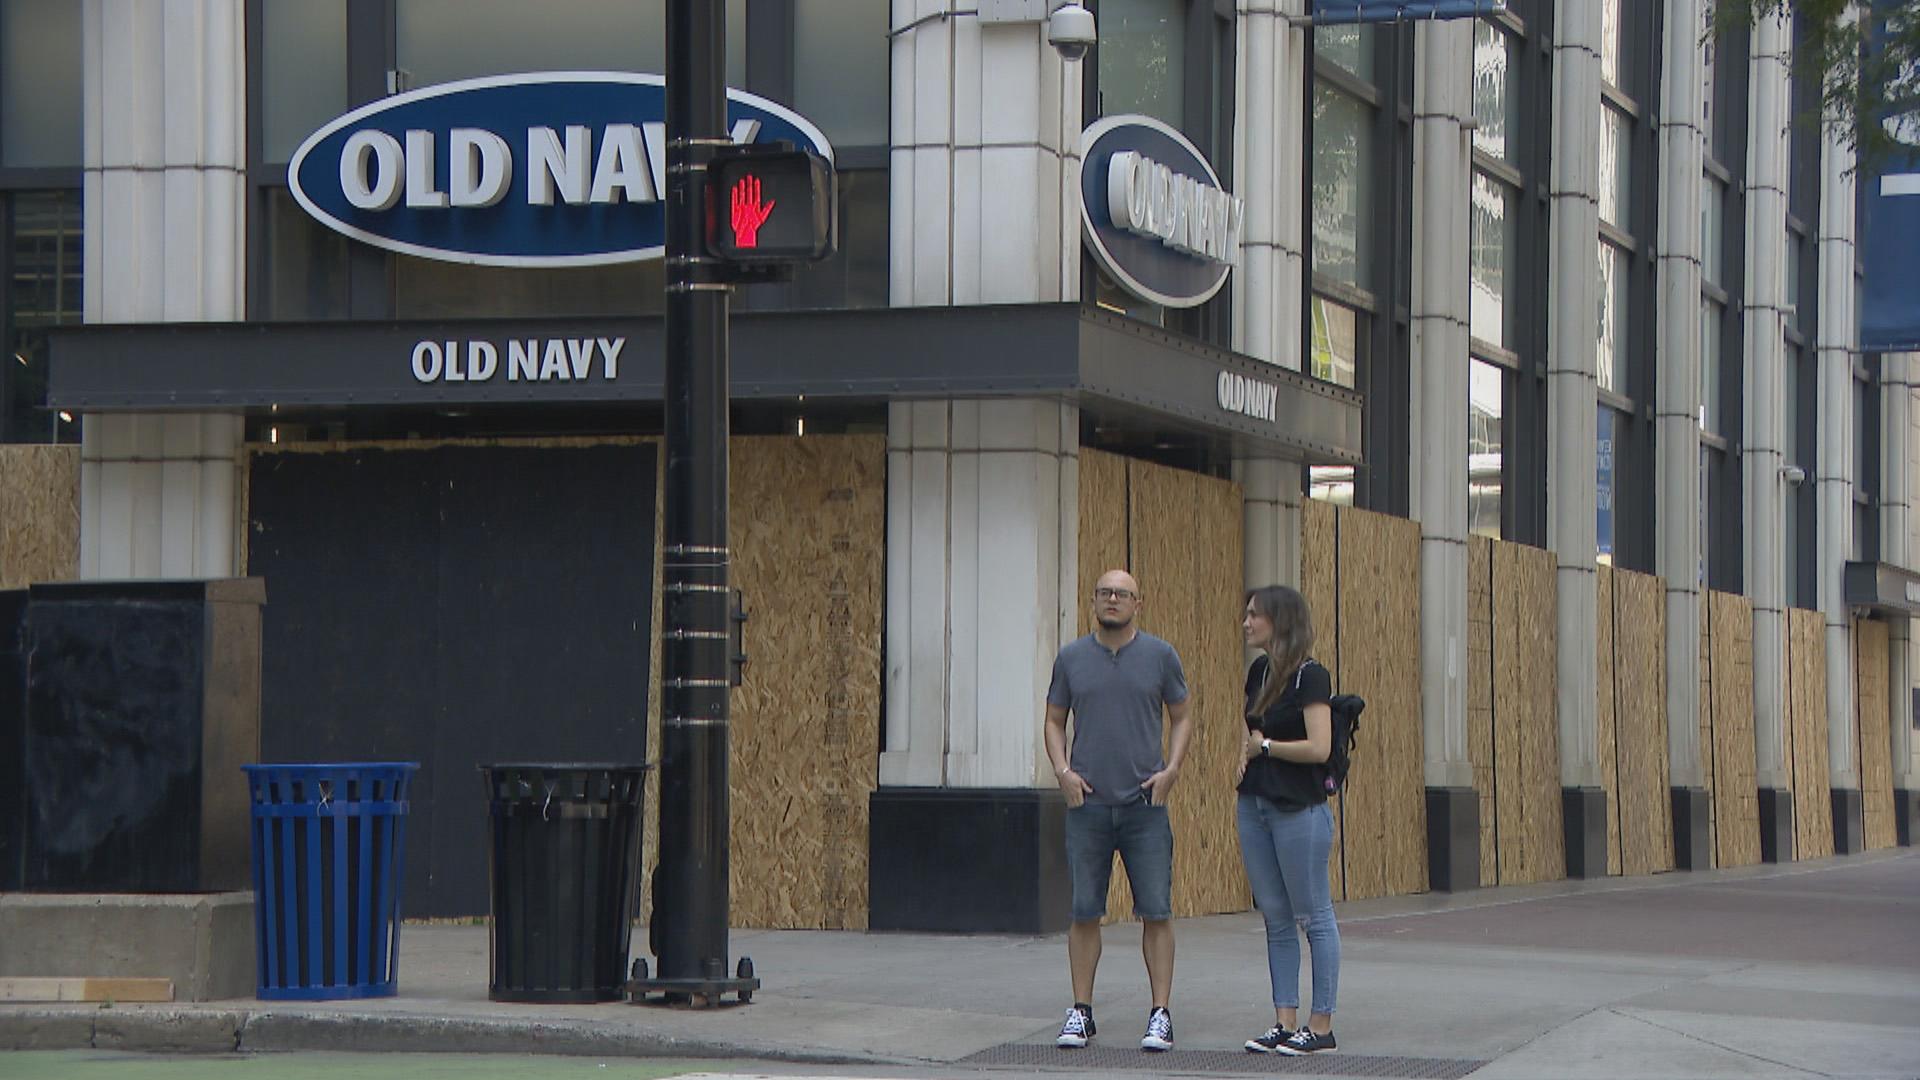 An Old Navy store in downtown Chicago is boarded up Monday, Aug. 10, 2020 after a night of looting and unrest. The city will restrict access to downtown streets Monday night. (WTTW News)